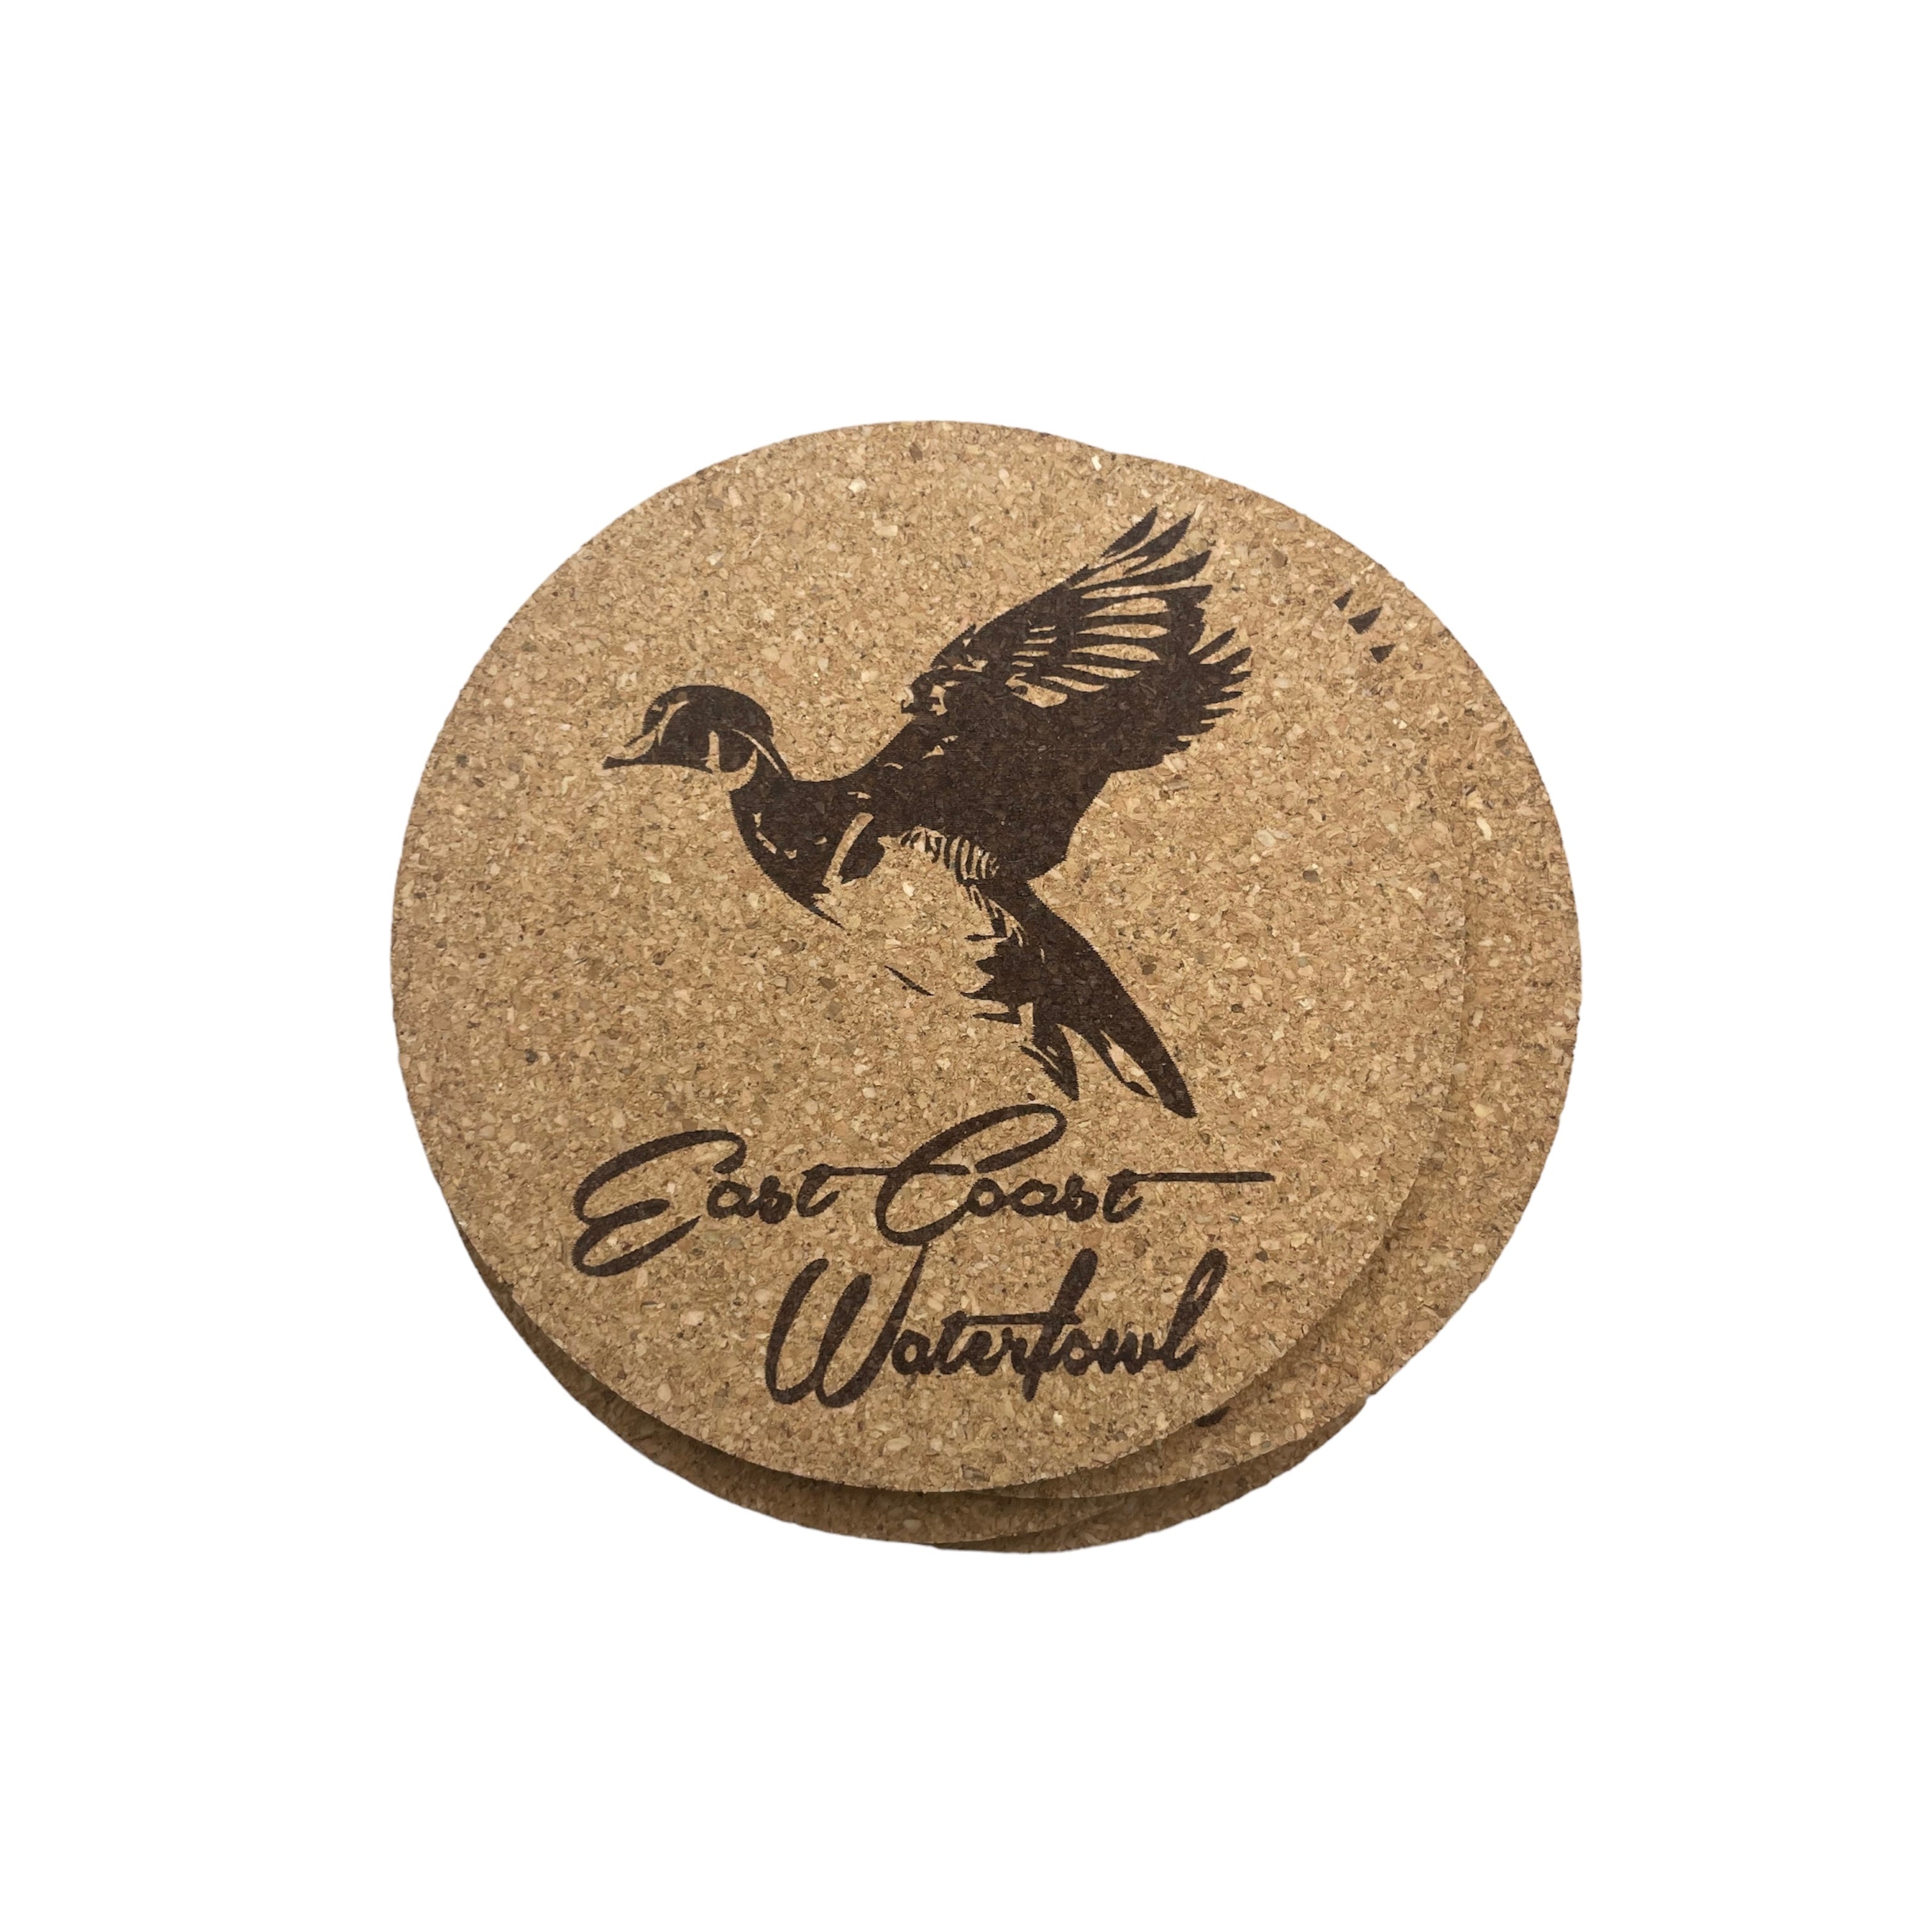 Round drink coasters with ECW logo and duck